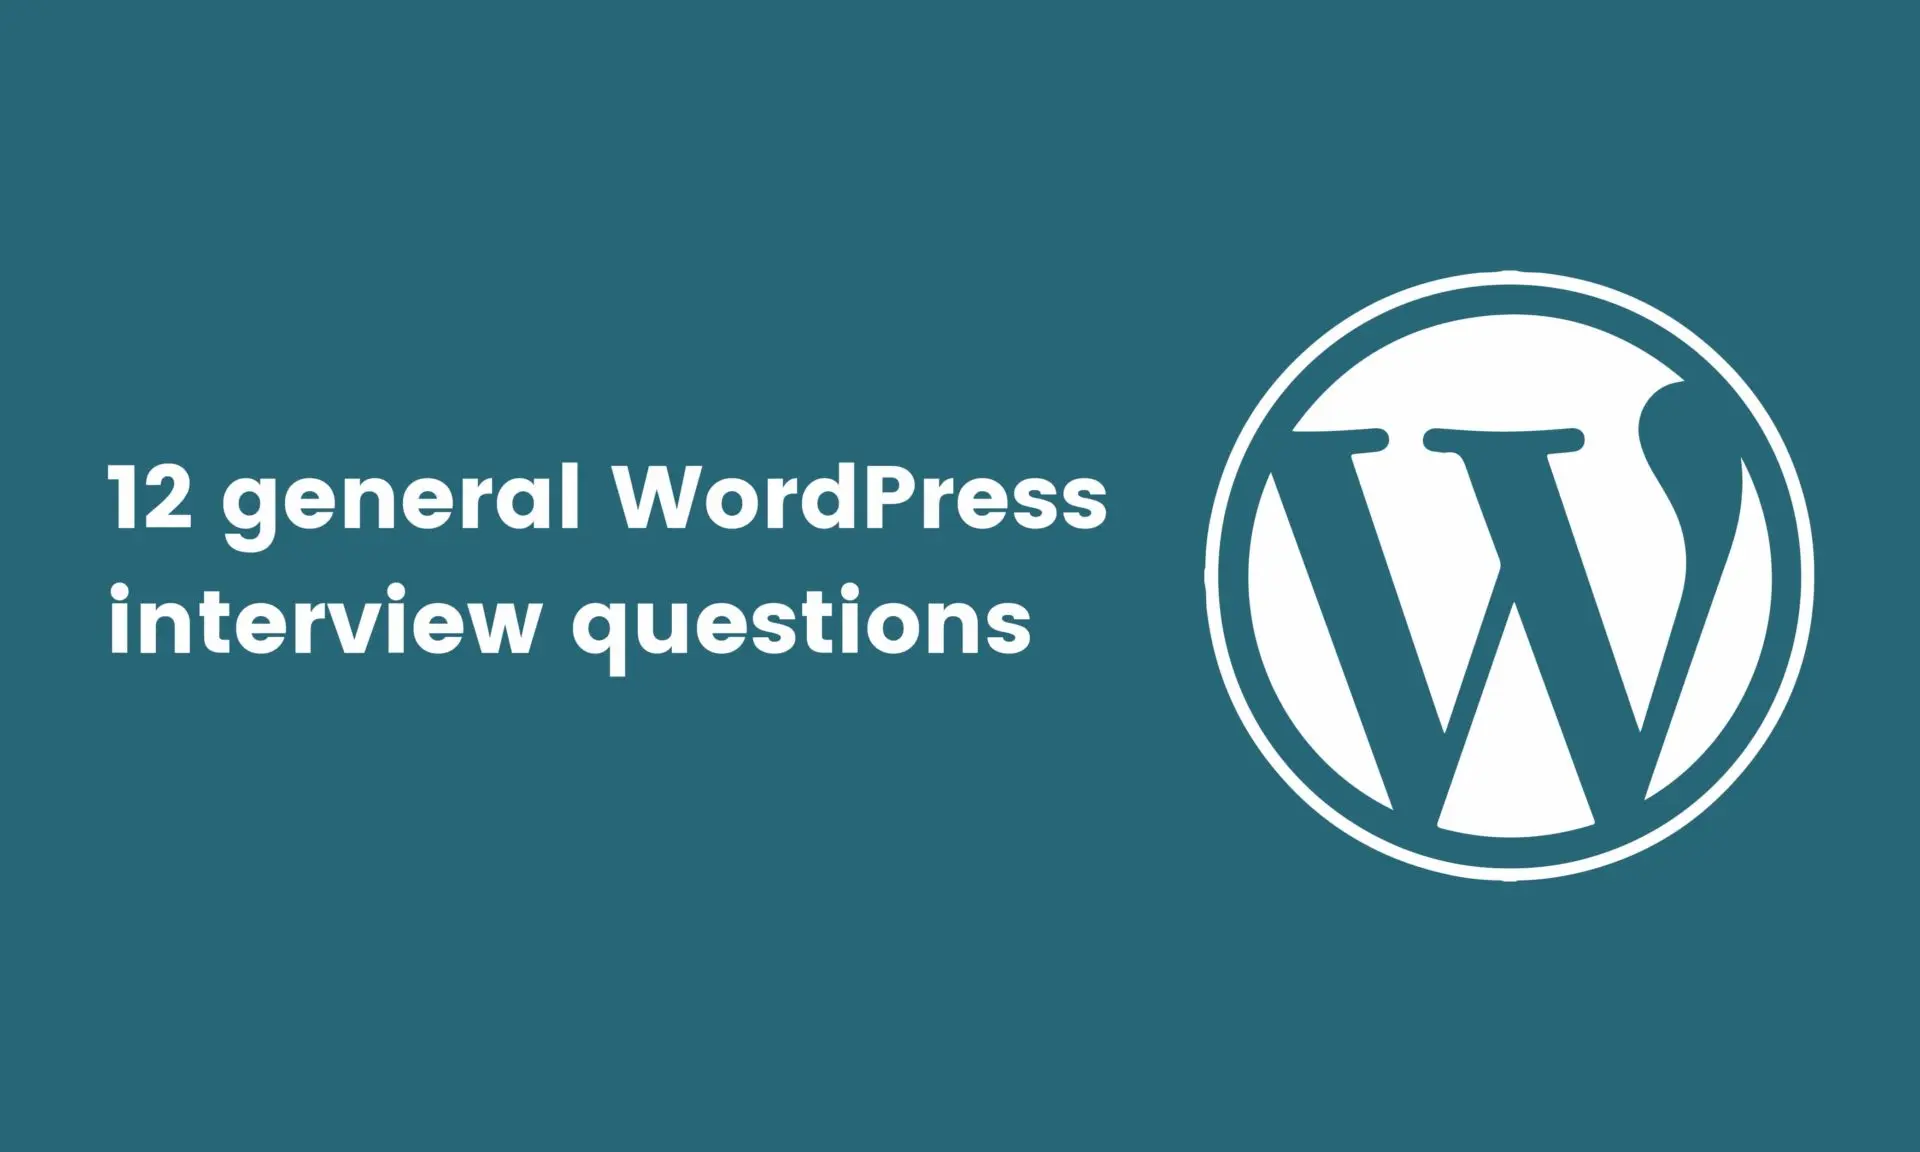 banner image for 12 general WordPress interview questions